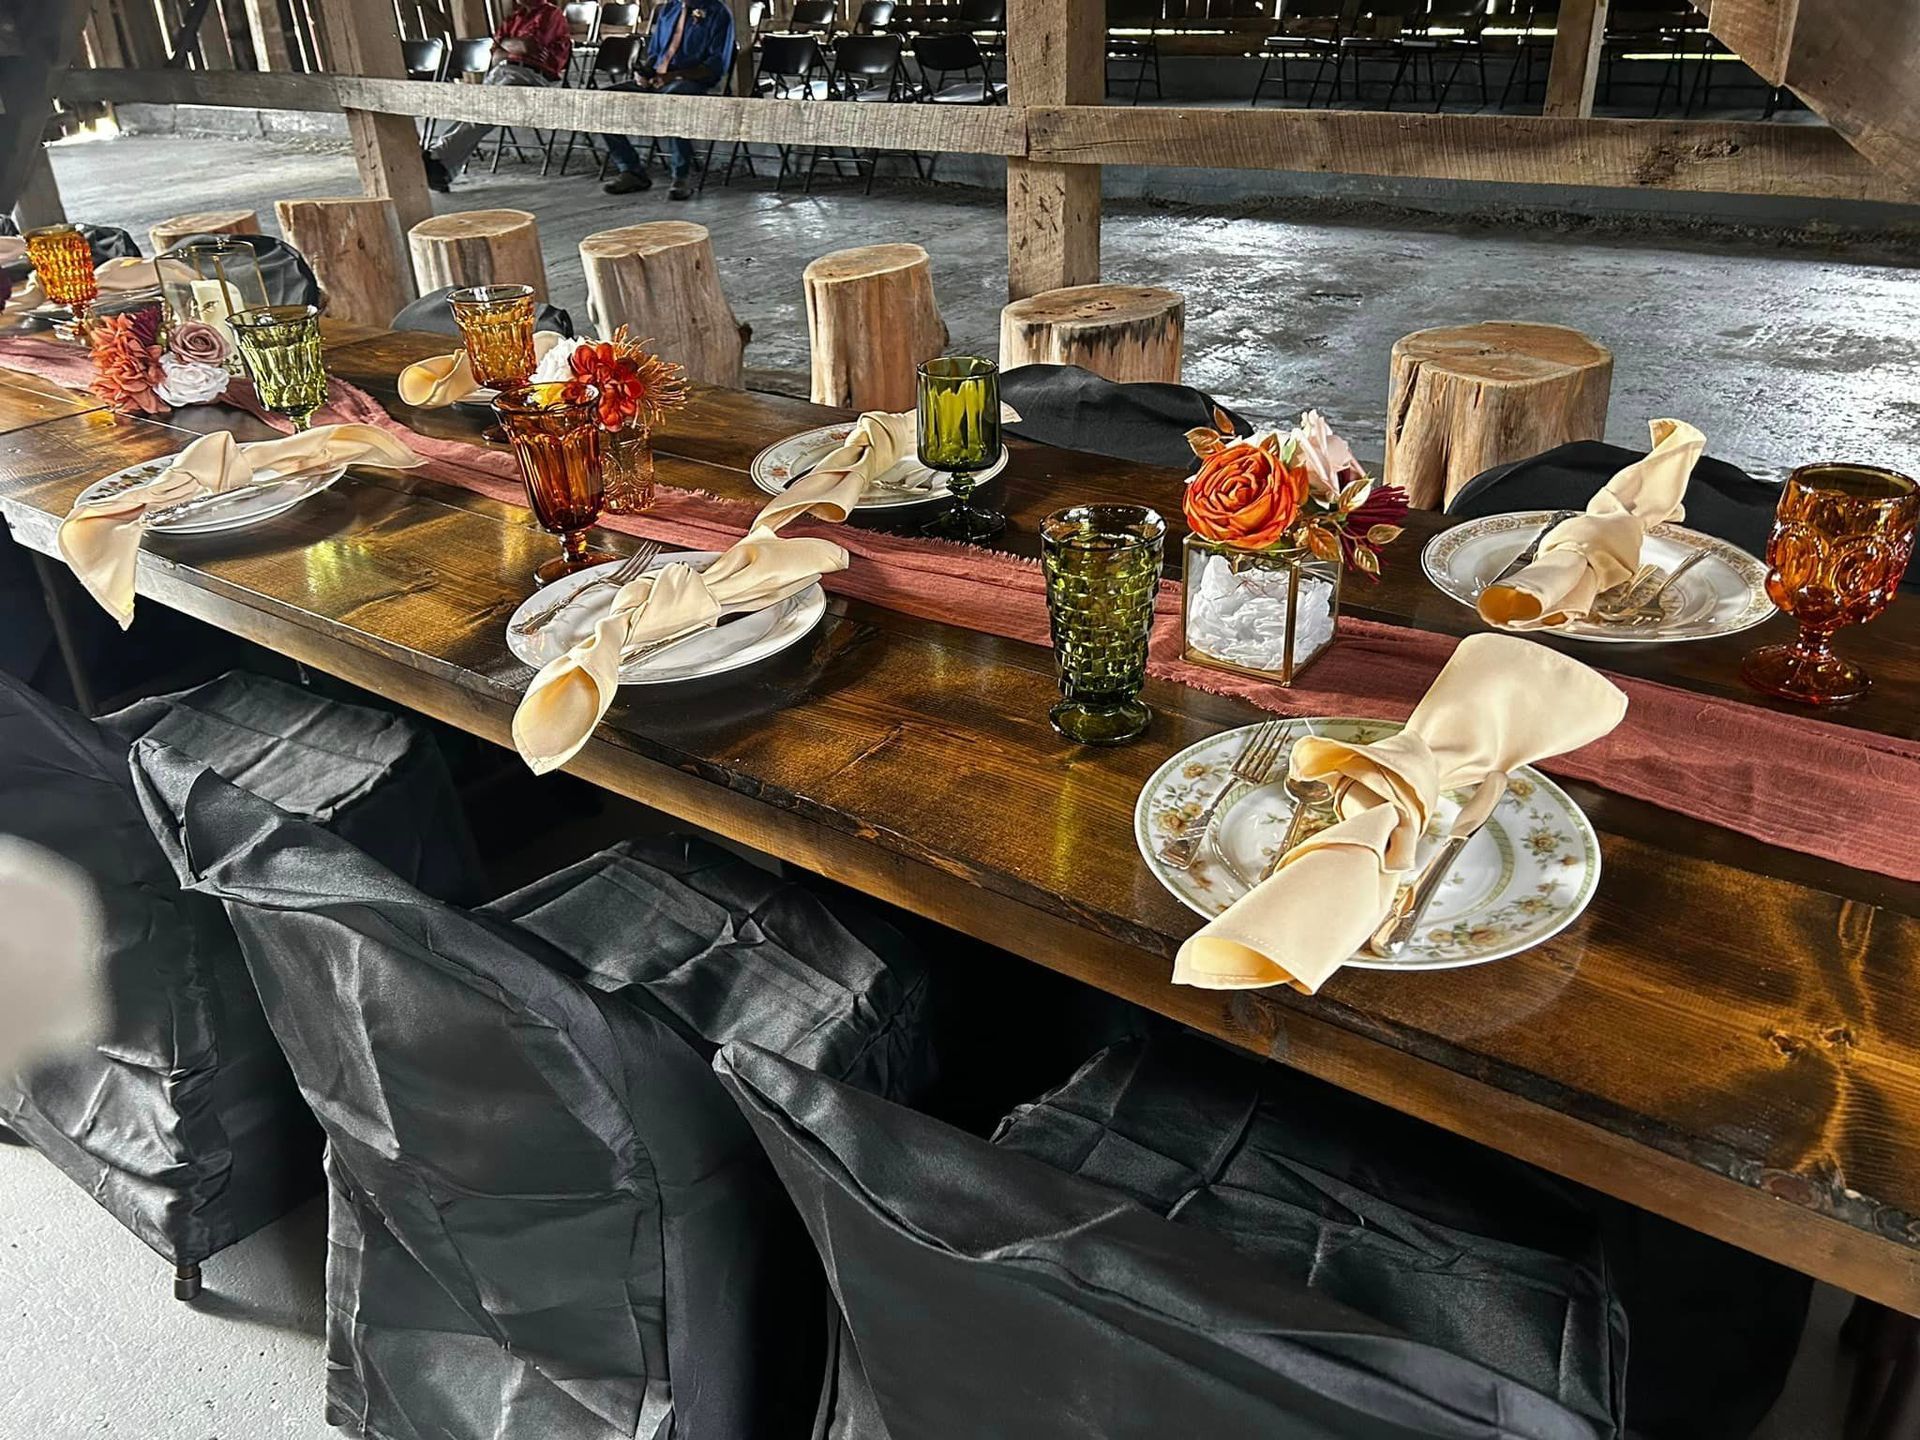 A long wooden table with plates , glasses , and napkins on it.